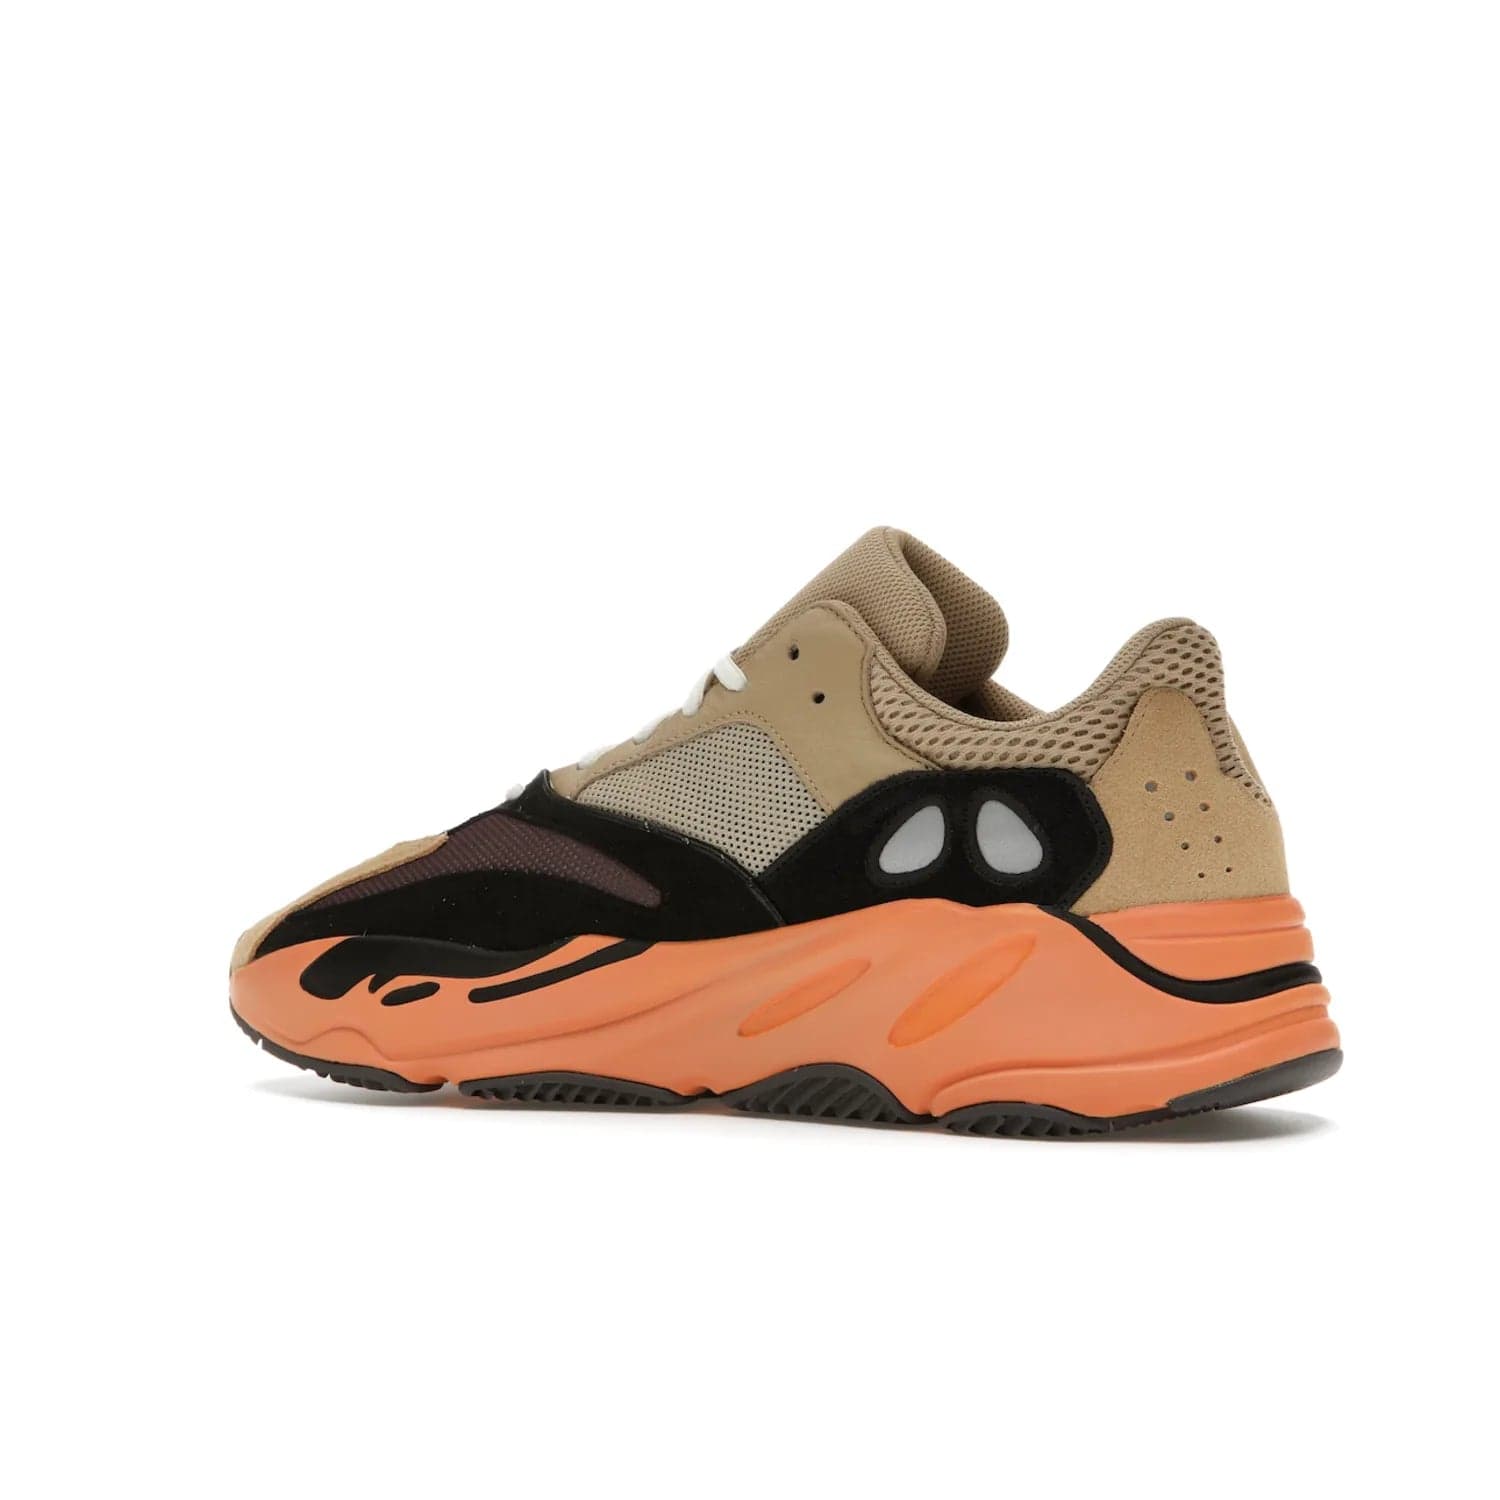 adidas Yeezy Boost 700 Enflame Amber - Image 22 - Only at www.BallersClubKickz.com - Adidas Yeezy Boost 700 Enflame Amber: Eye-catching design with pale yellow, brown, teal, and orange! Get yours in June 2021.